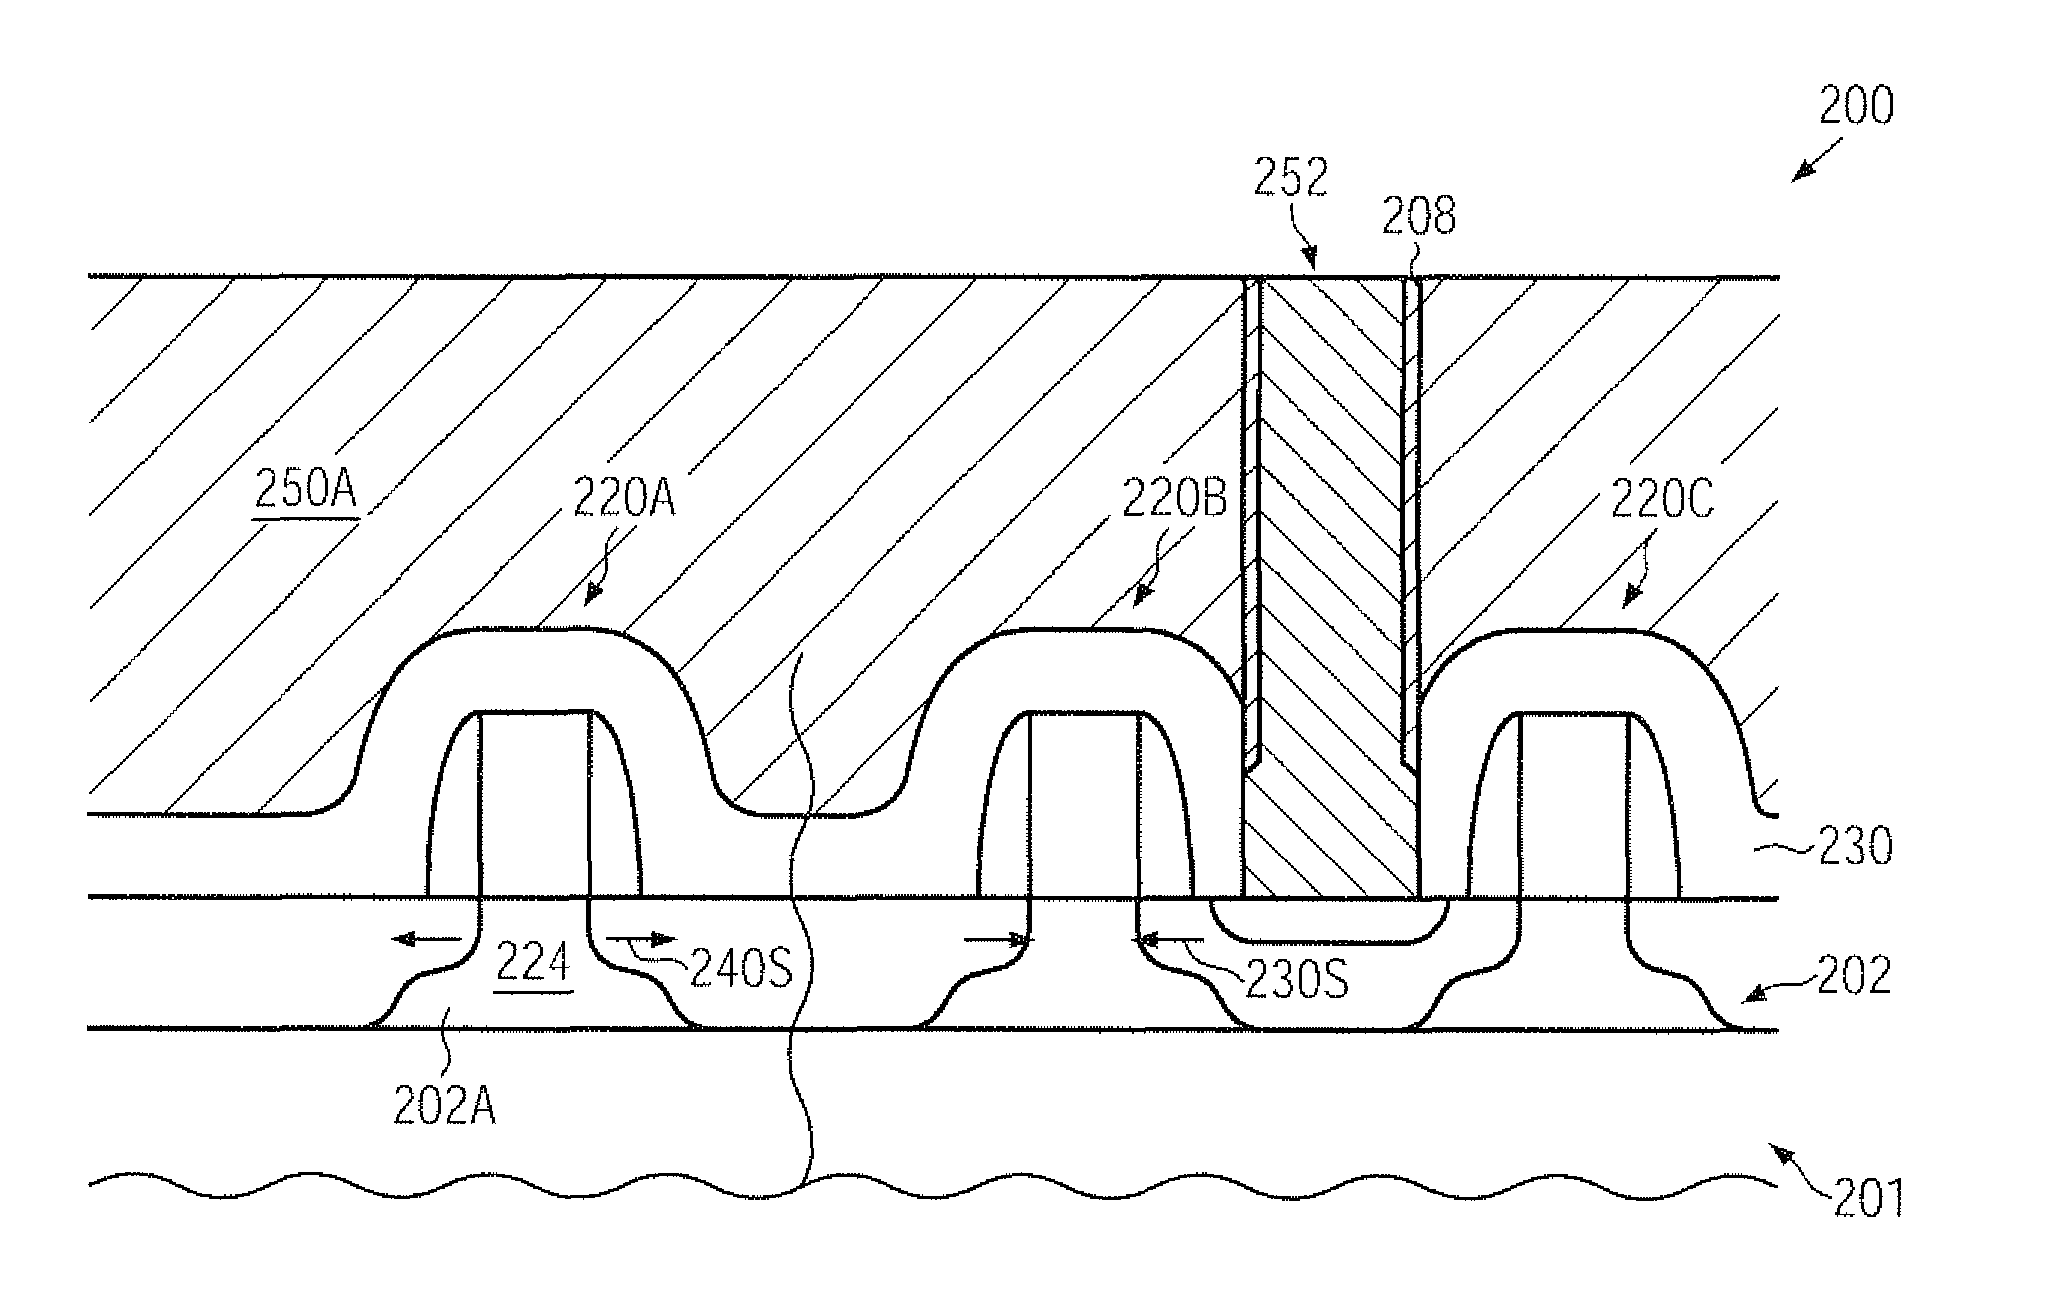 Void sealing in a dielectric material of a contact level of a semiconductor device comprising closely spaced transistors